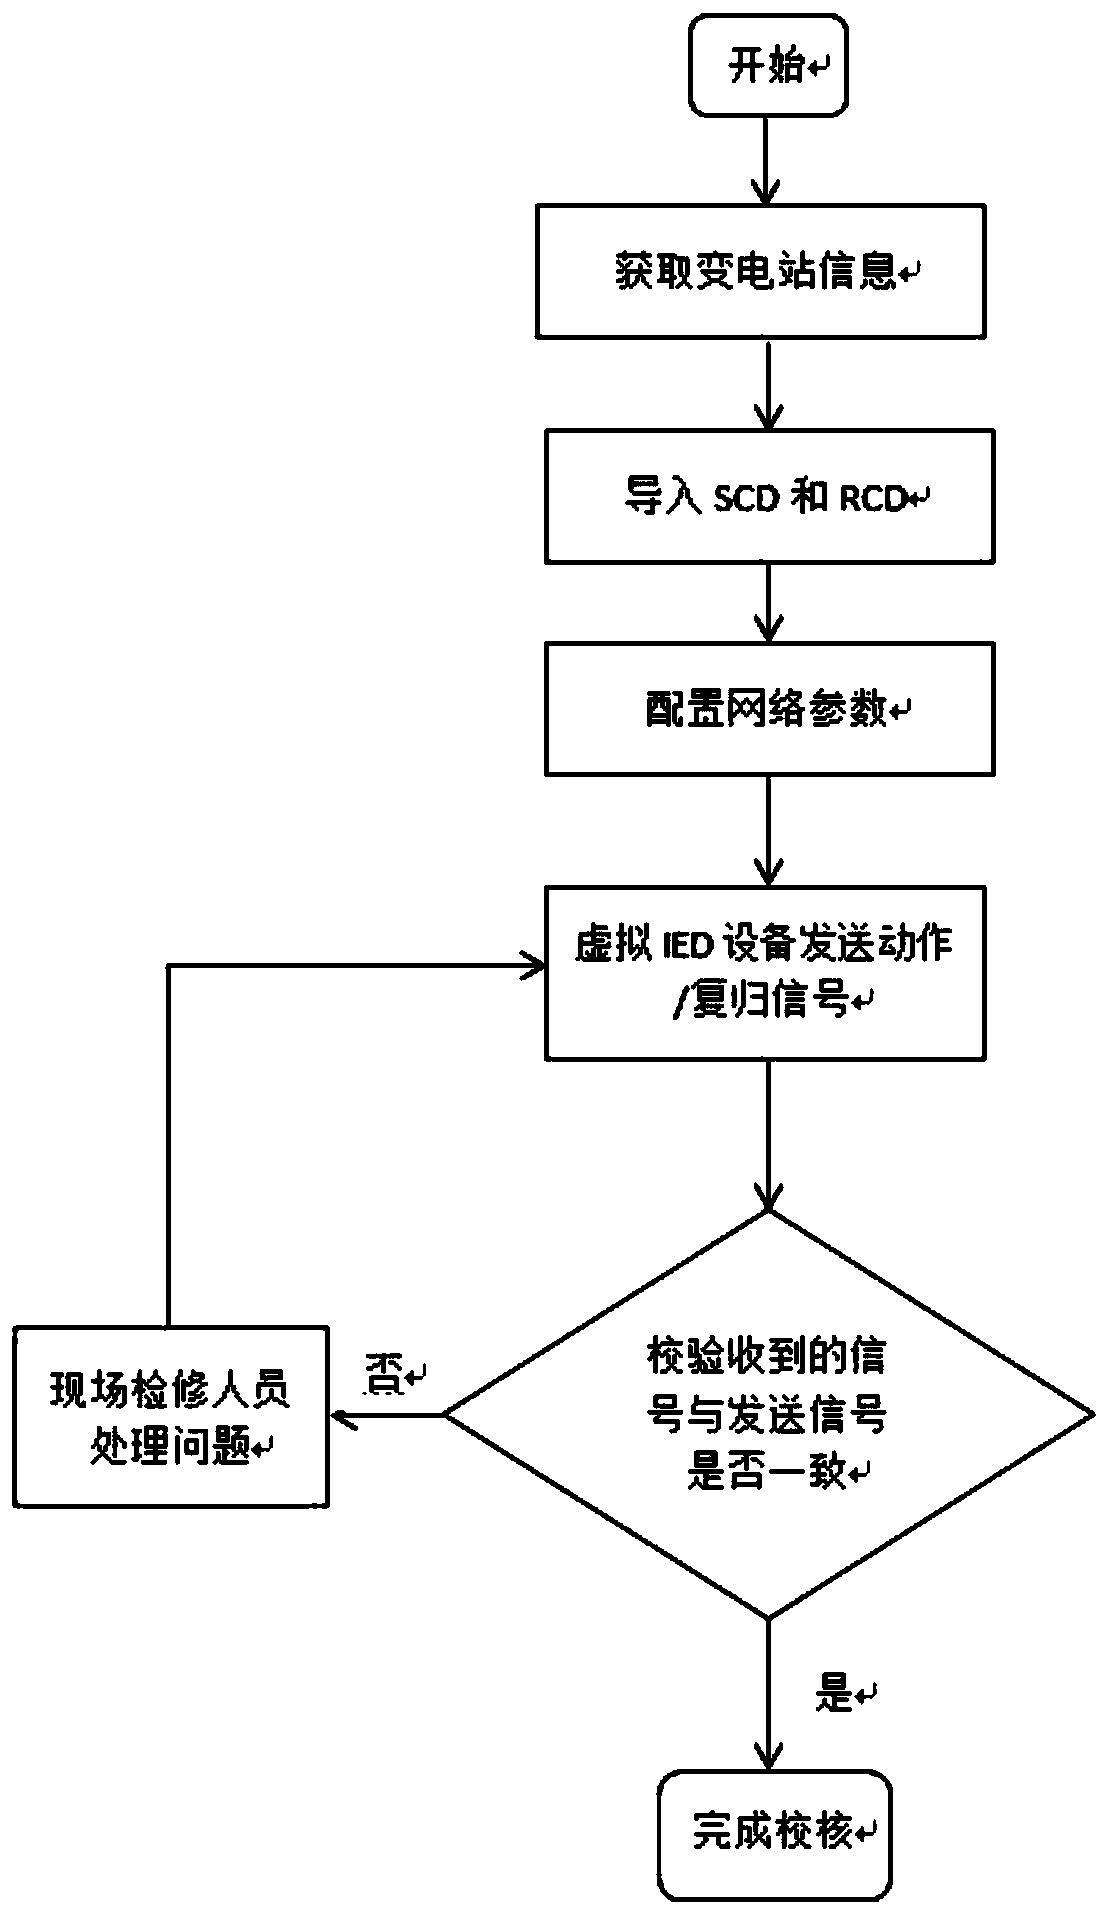 Telecontrol checking method based on SCD file and RCD file